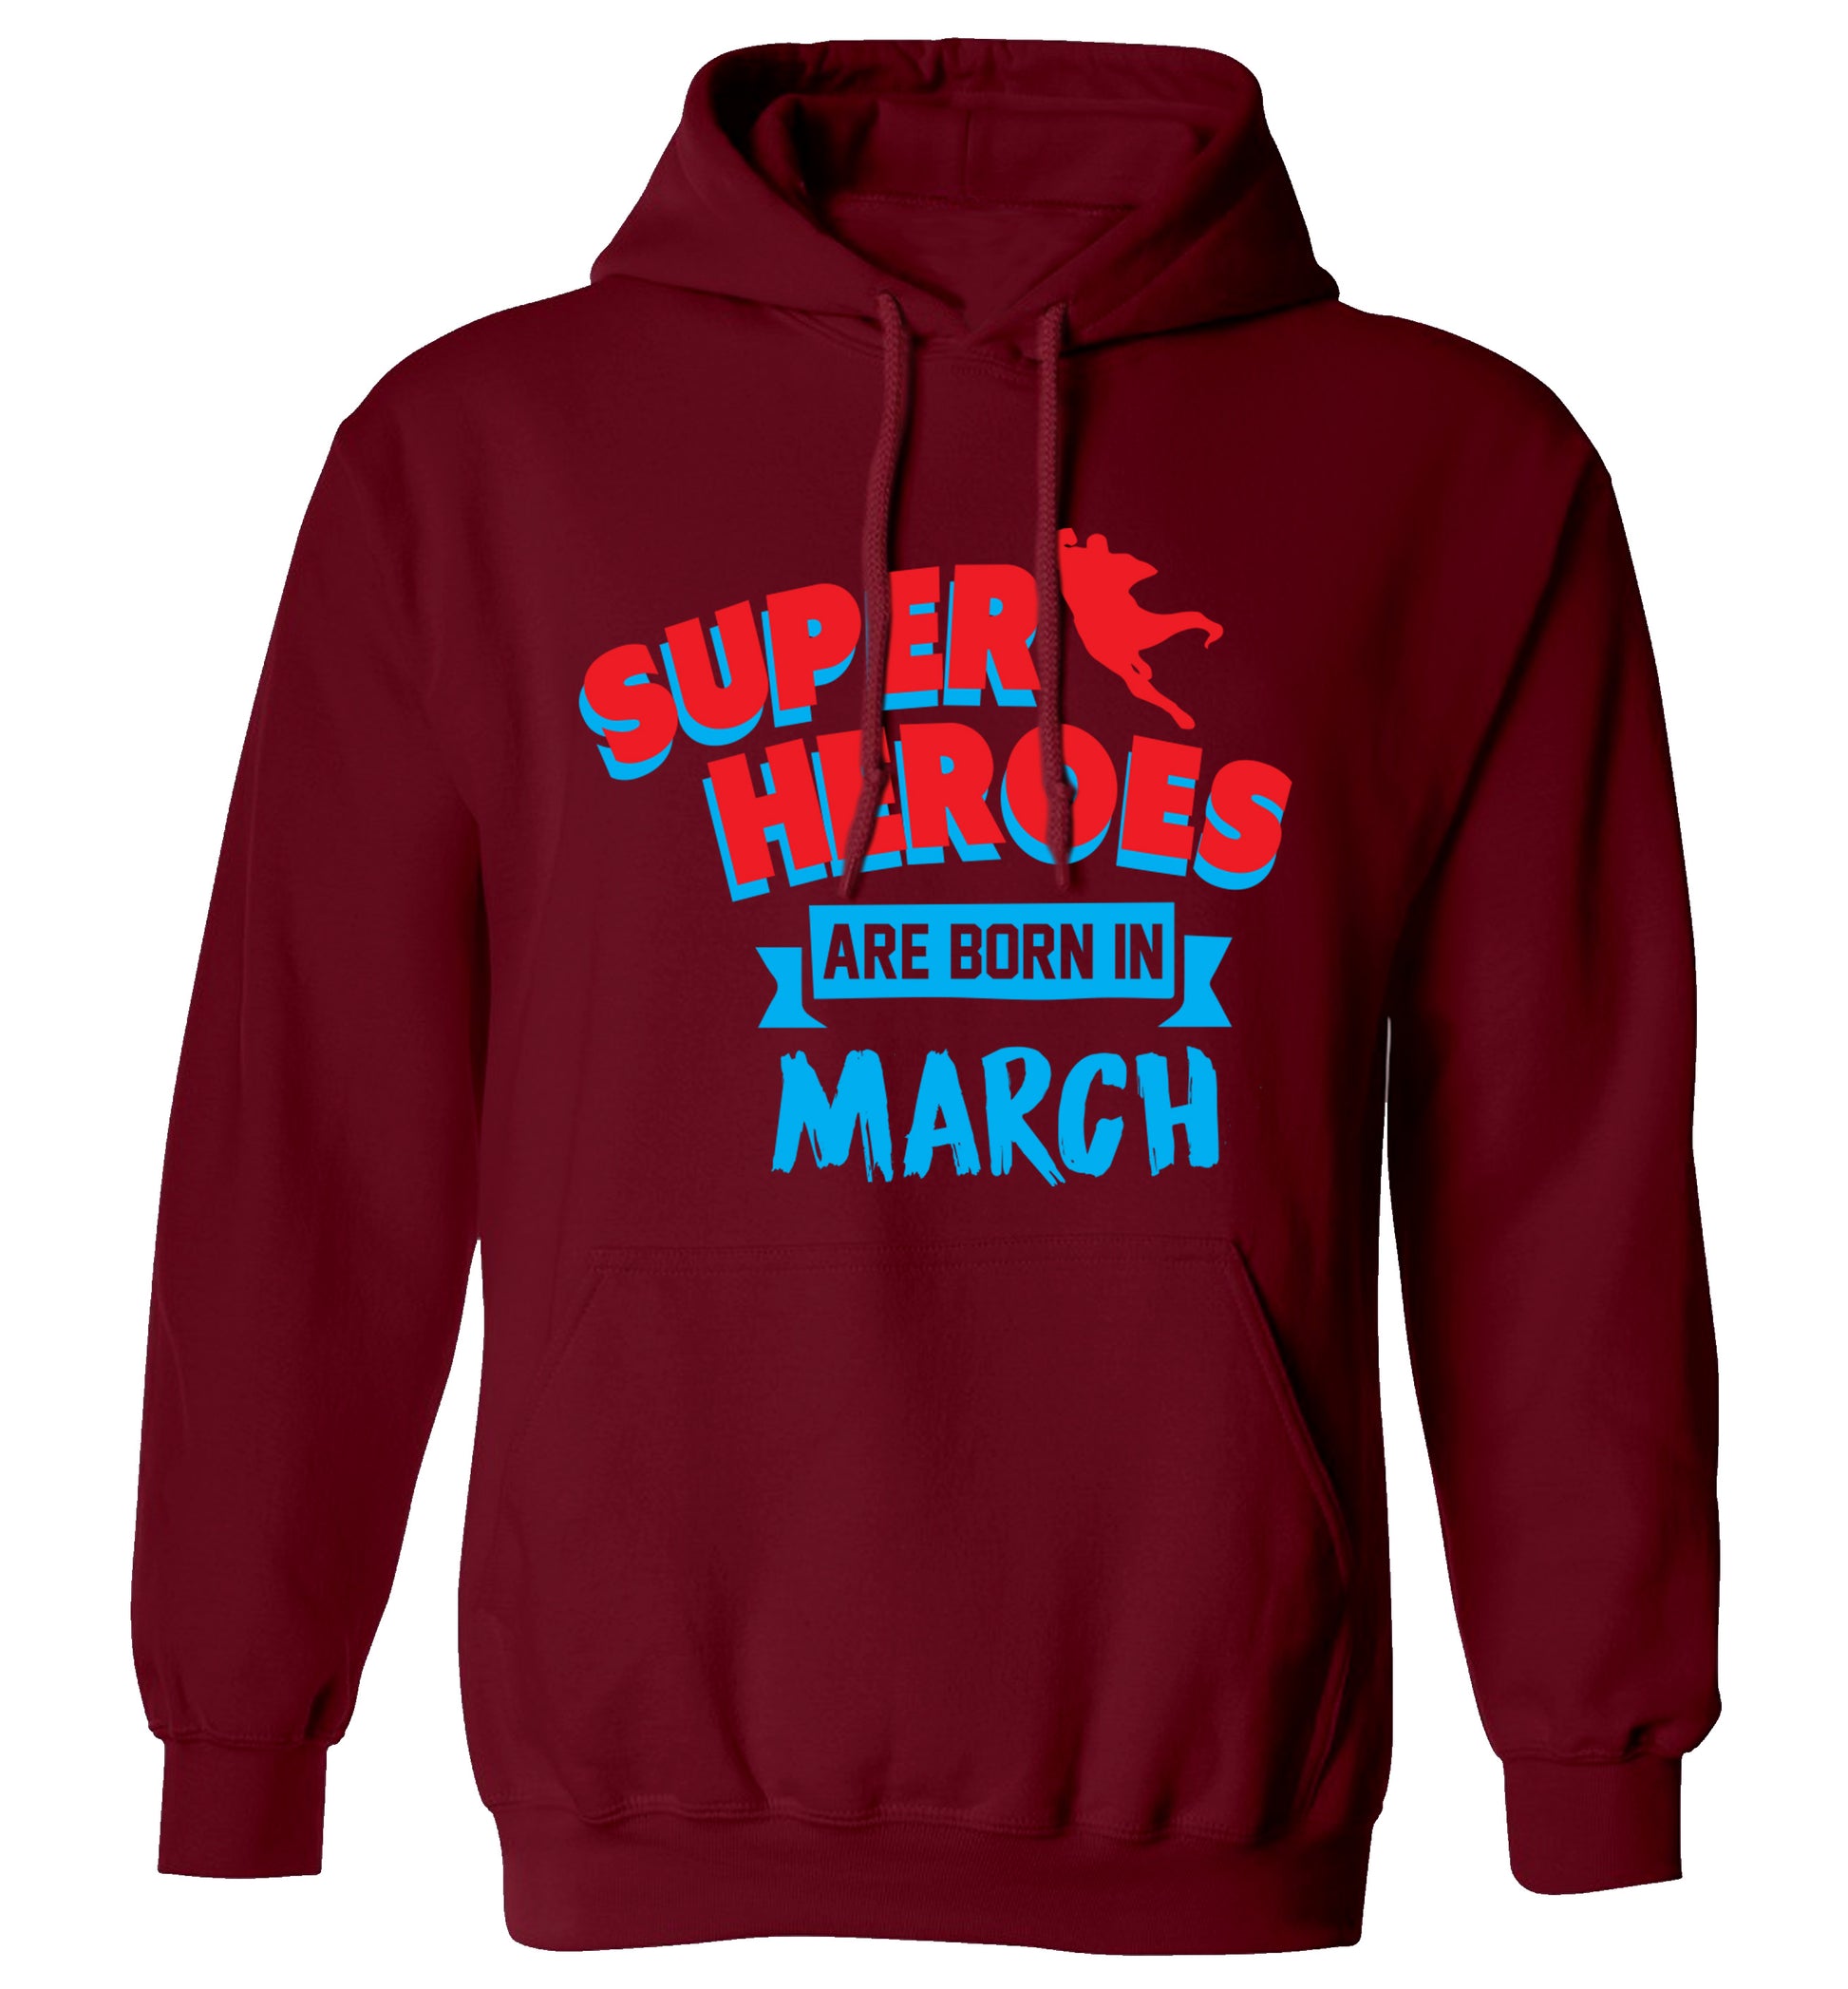 Superheros are born in March adults unisex maroon hoodie 2XL